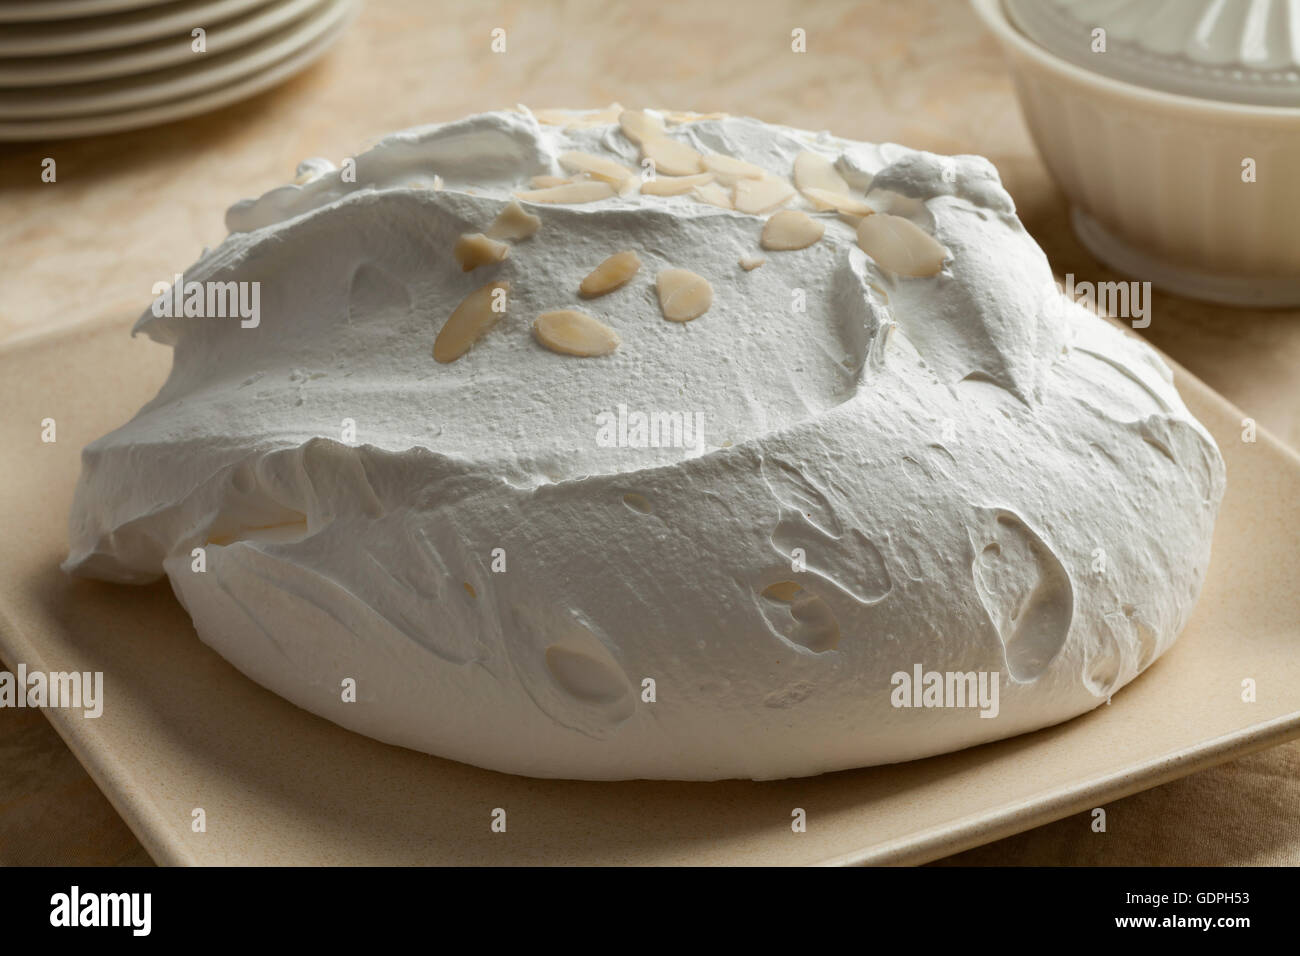 Fresh baked meringue with almonds Stock Photo